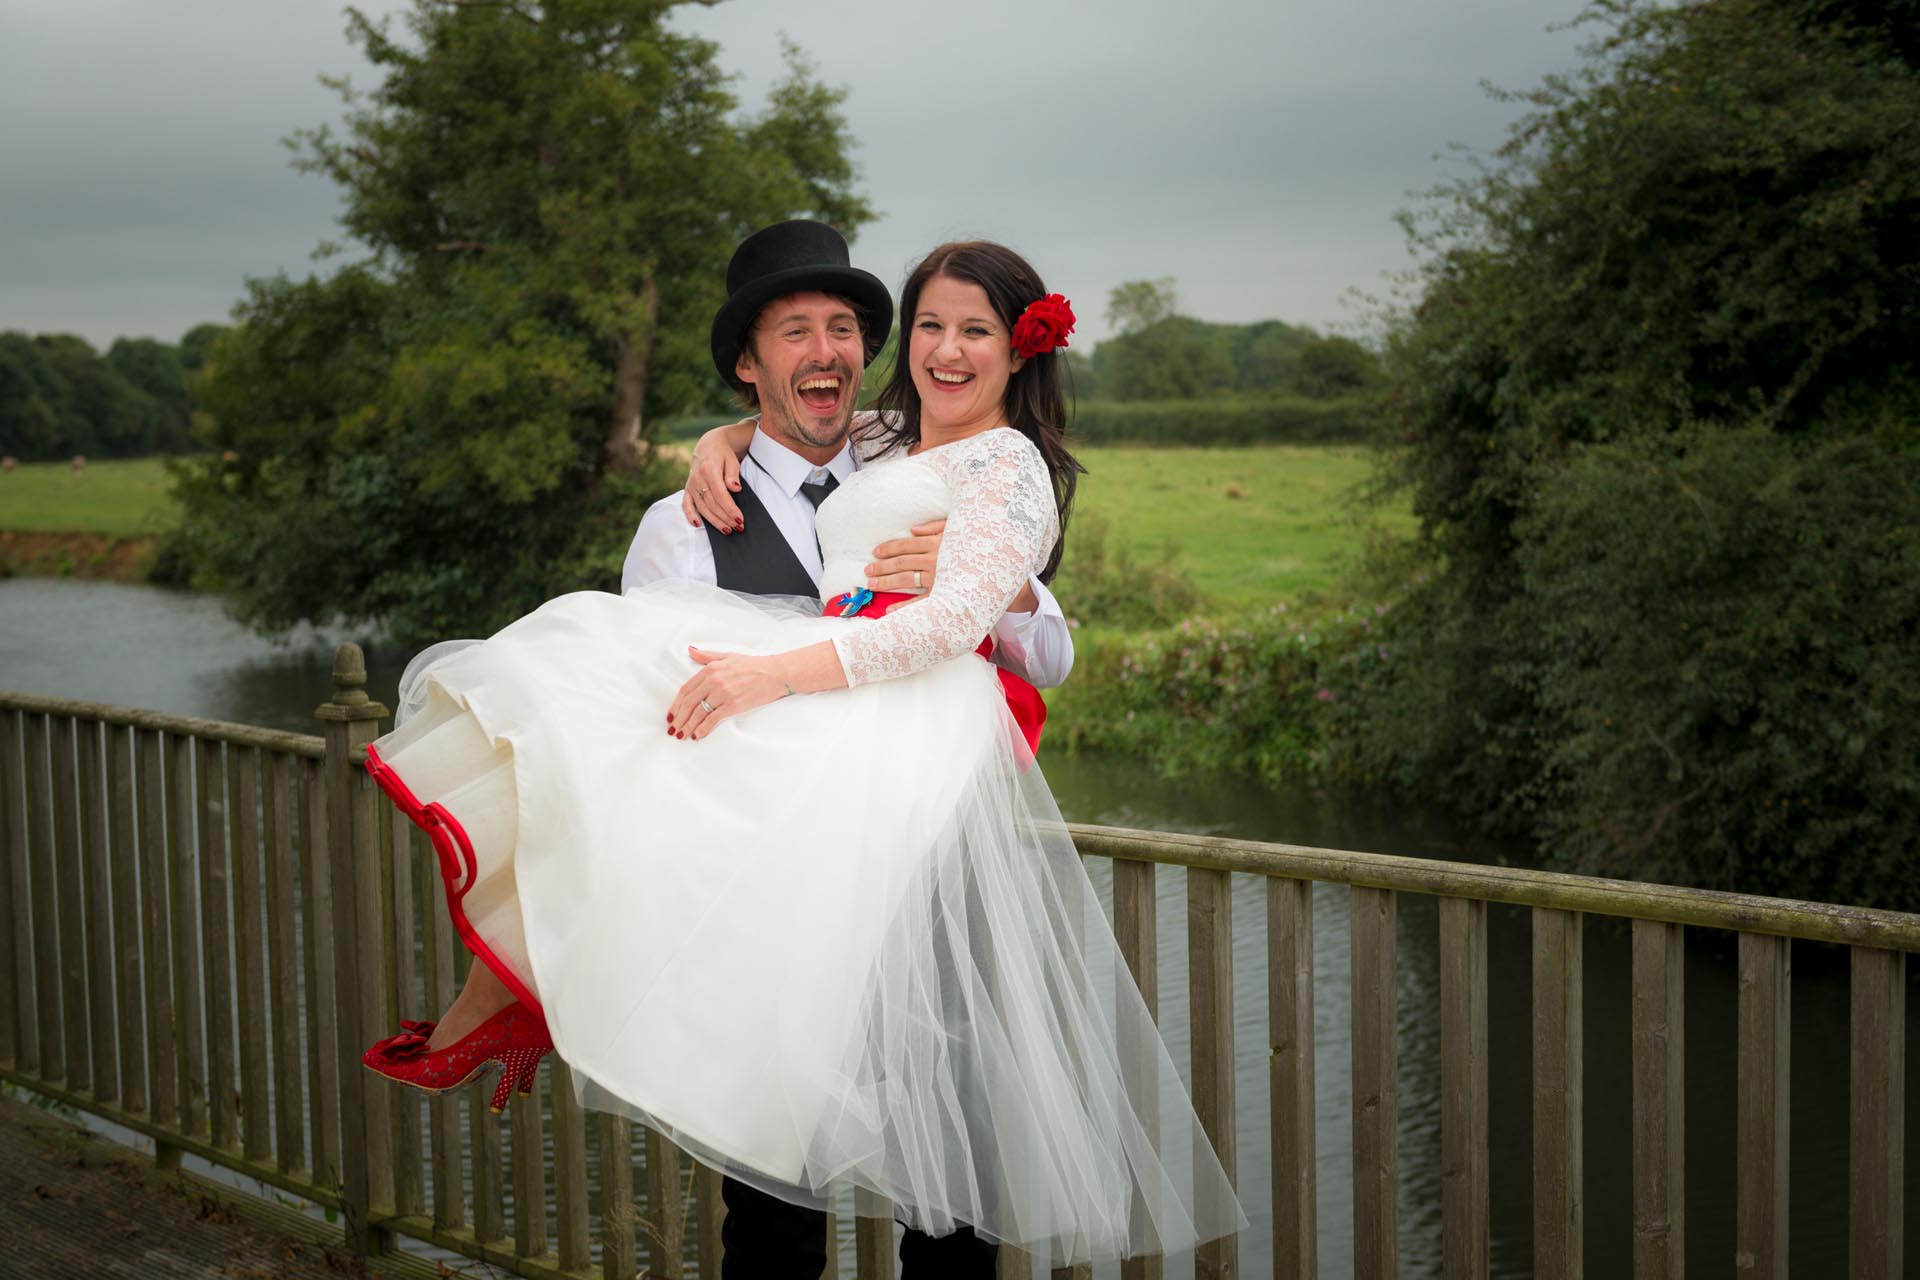 Barcombe Mills Wedding near Lewes east Sussex wedding photographer based in Bromley kent